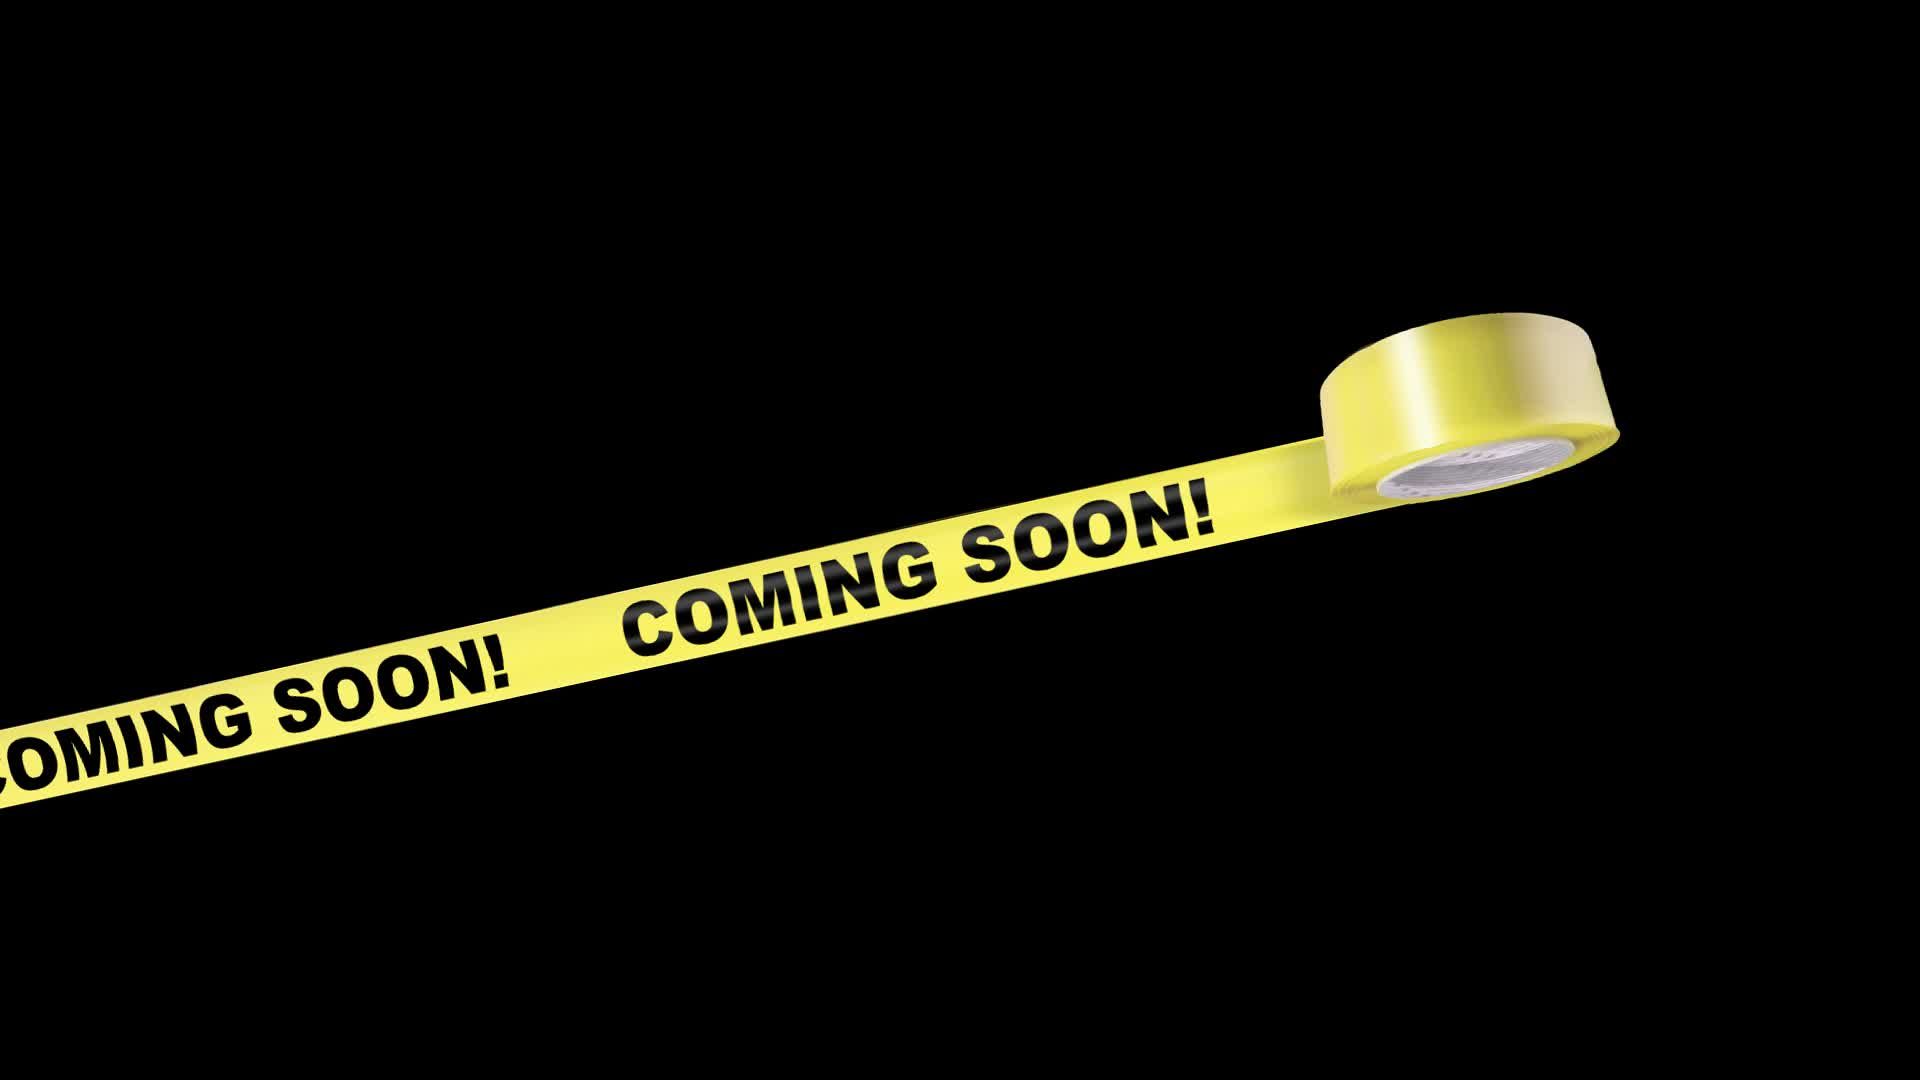 Coming Soon Caution Tape Animation With .wallpaper House.com